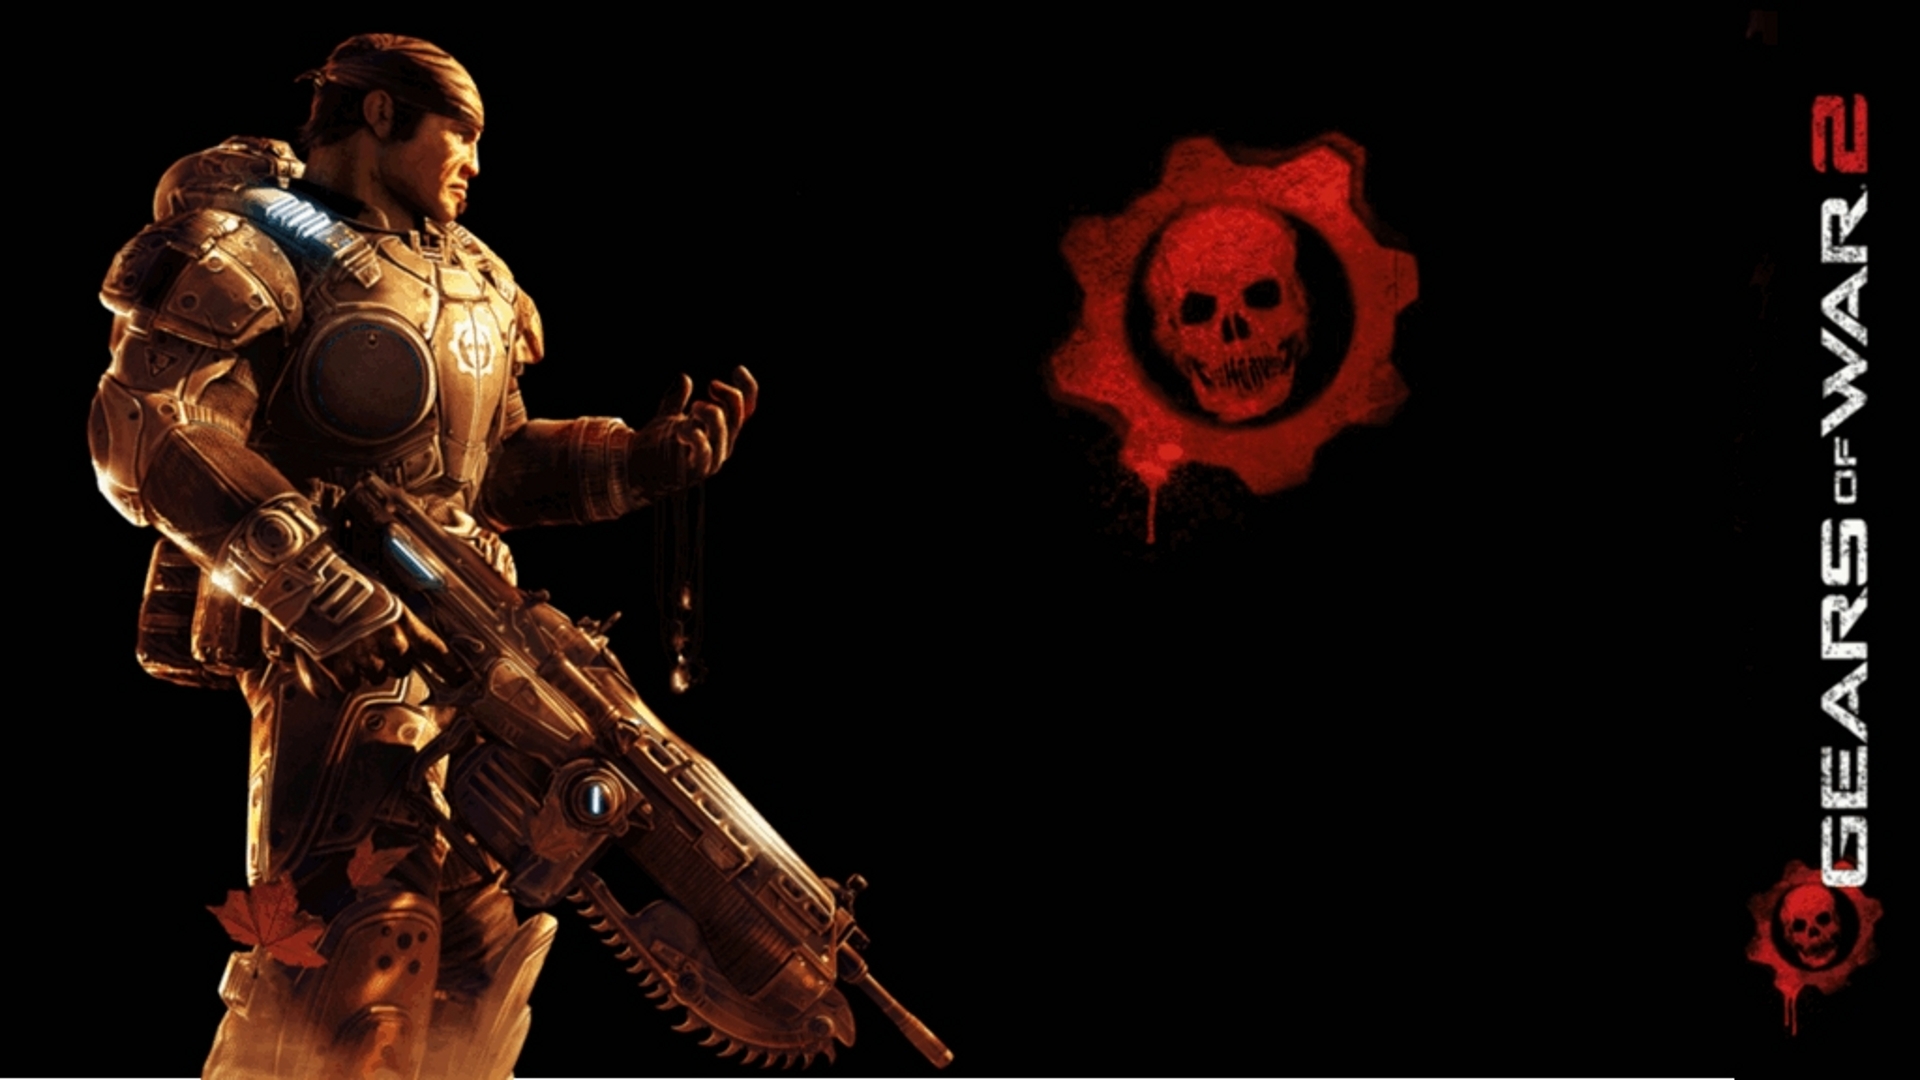 gears of war 2 submitted by morkot gears of war nxe 001 submitted by